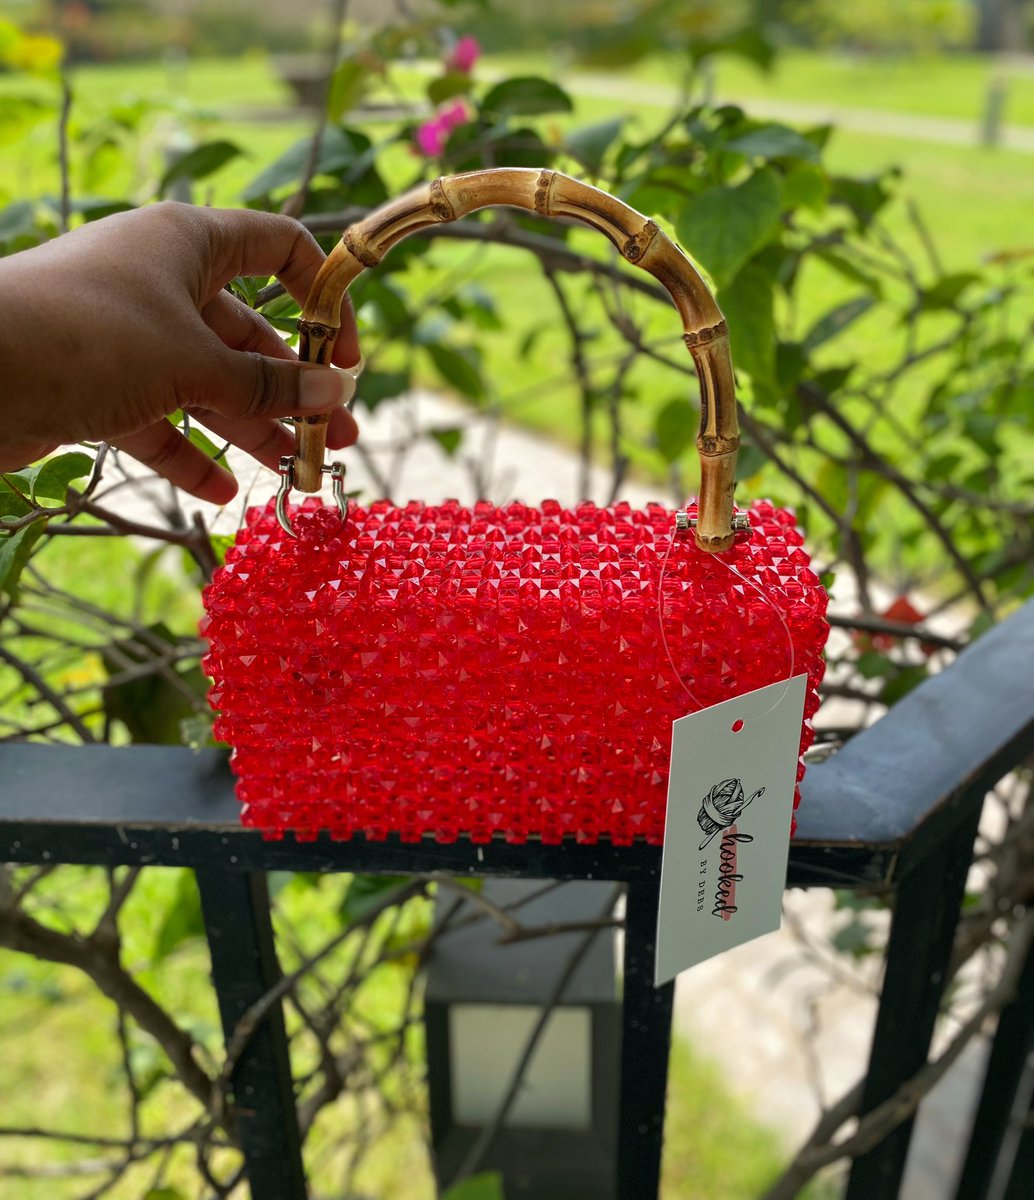 Bag Aseda Price: 380GHS Colors: Off white & Red only. Dimensions: 7.8 (W) x 4.2 (L) x 2.8 (B) in *Bamboo handle* Available on Made to Order basis (3-10 working days)